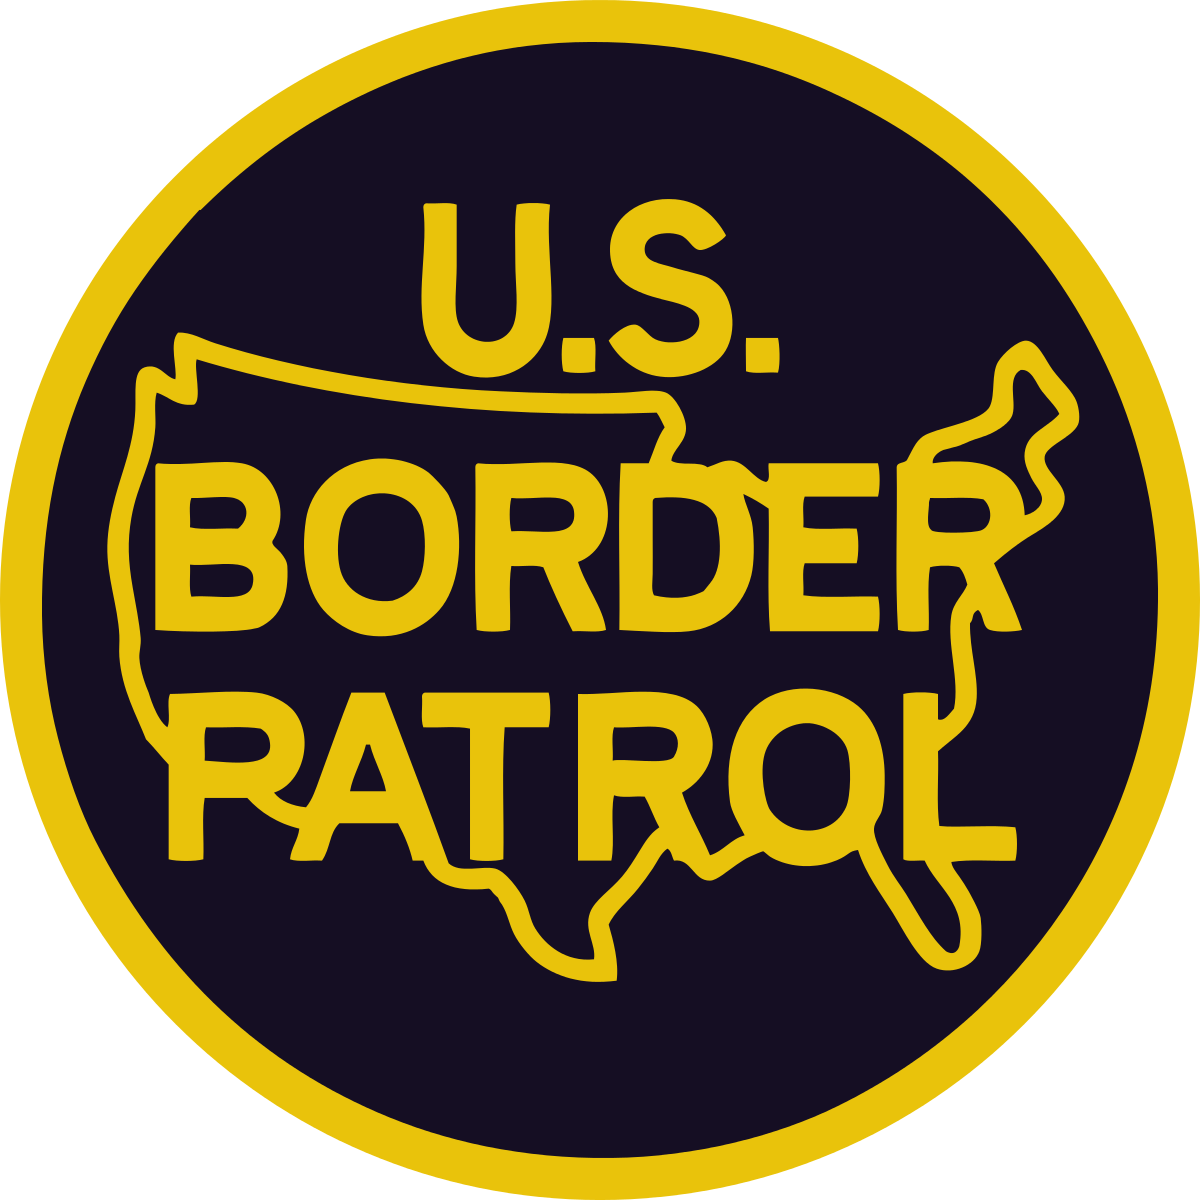 High Quality Border Patrol Logo with transparency Blank Meme Template